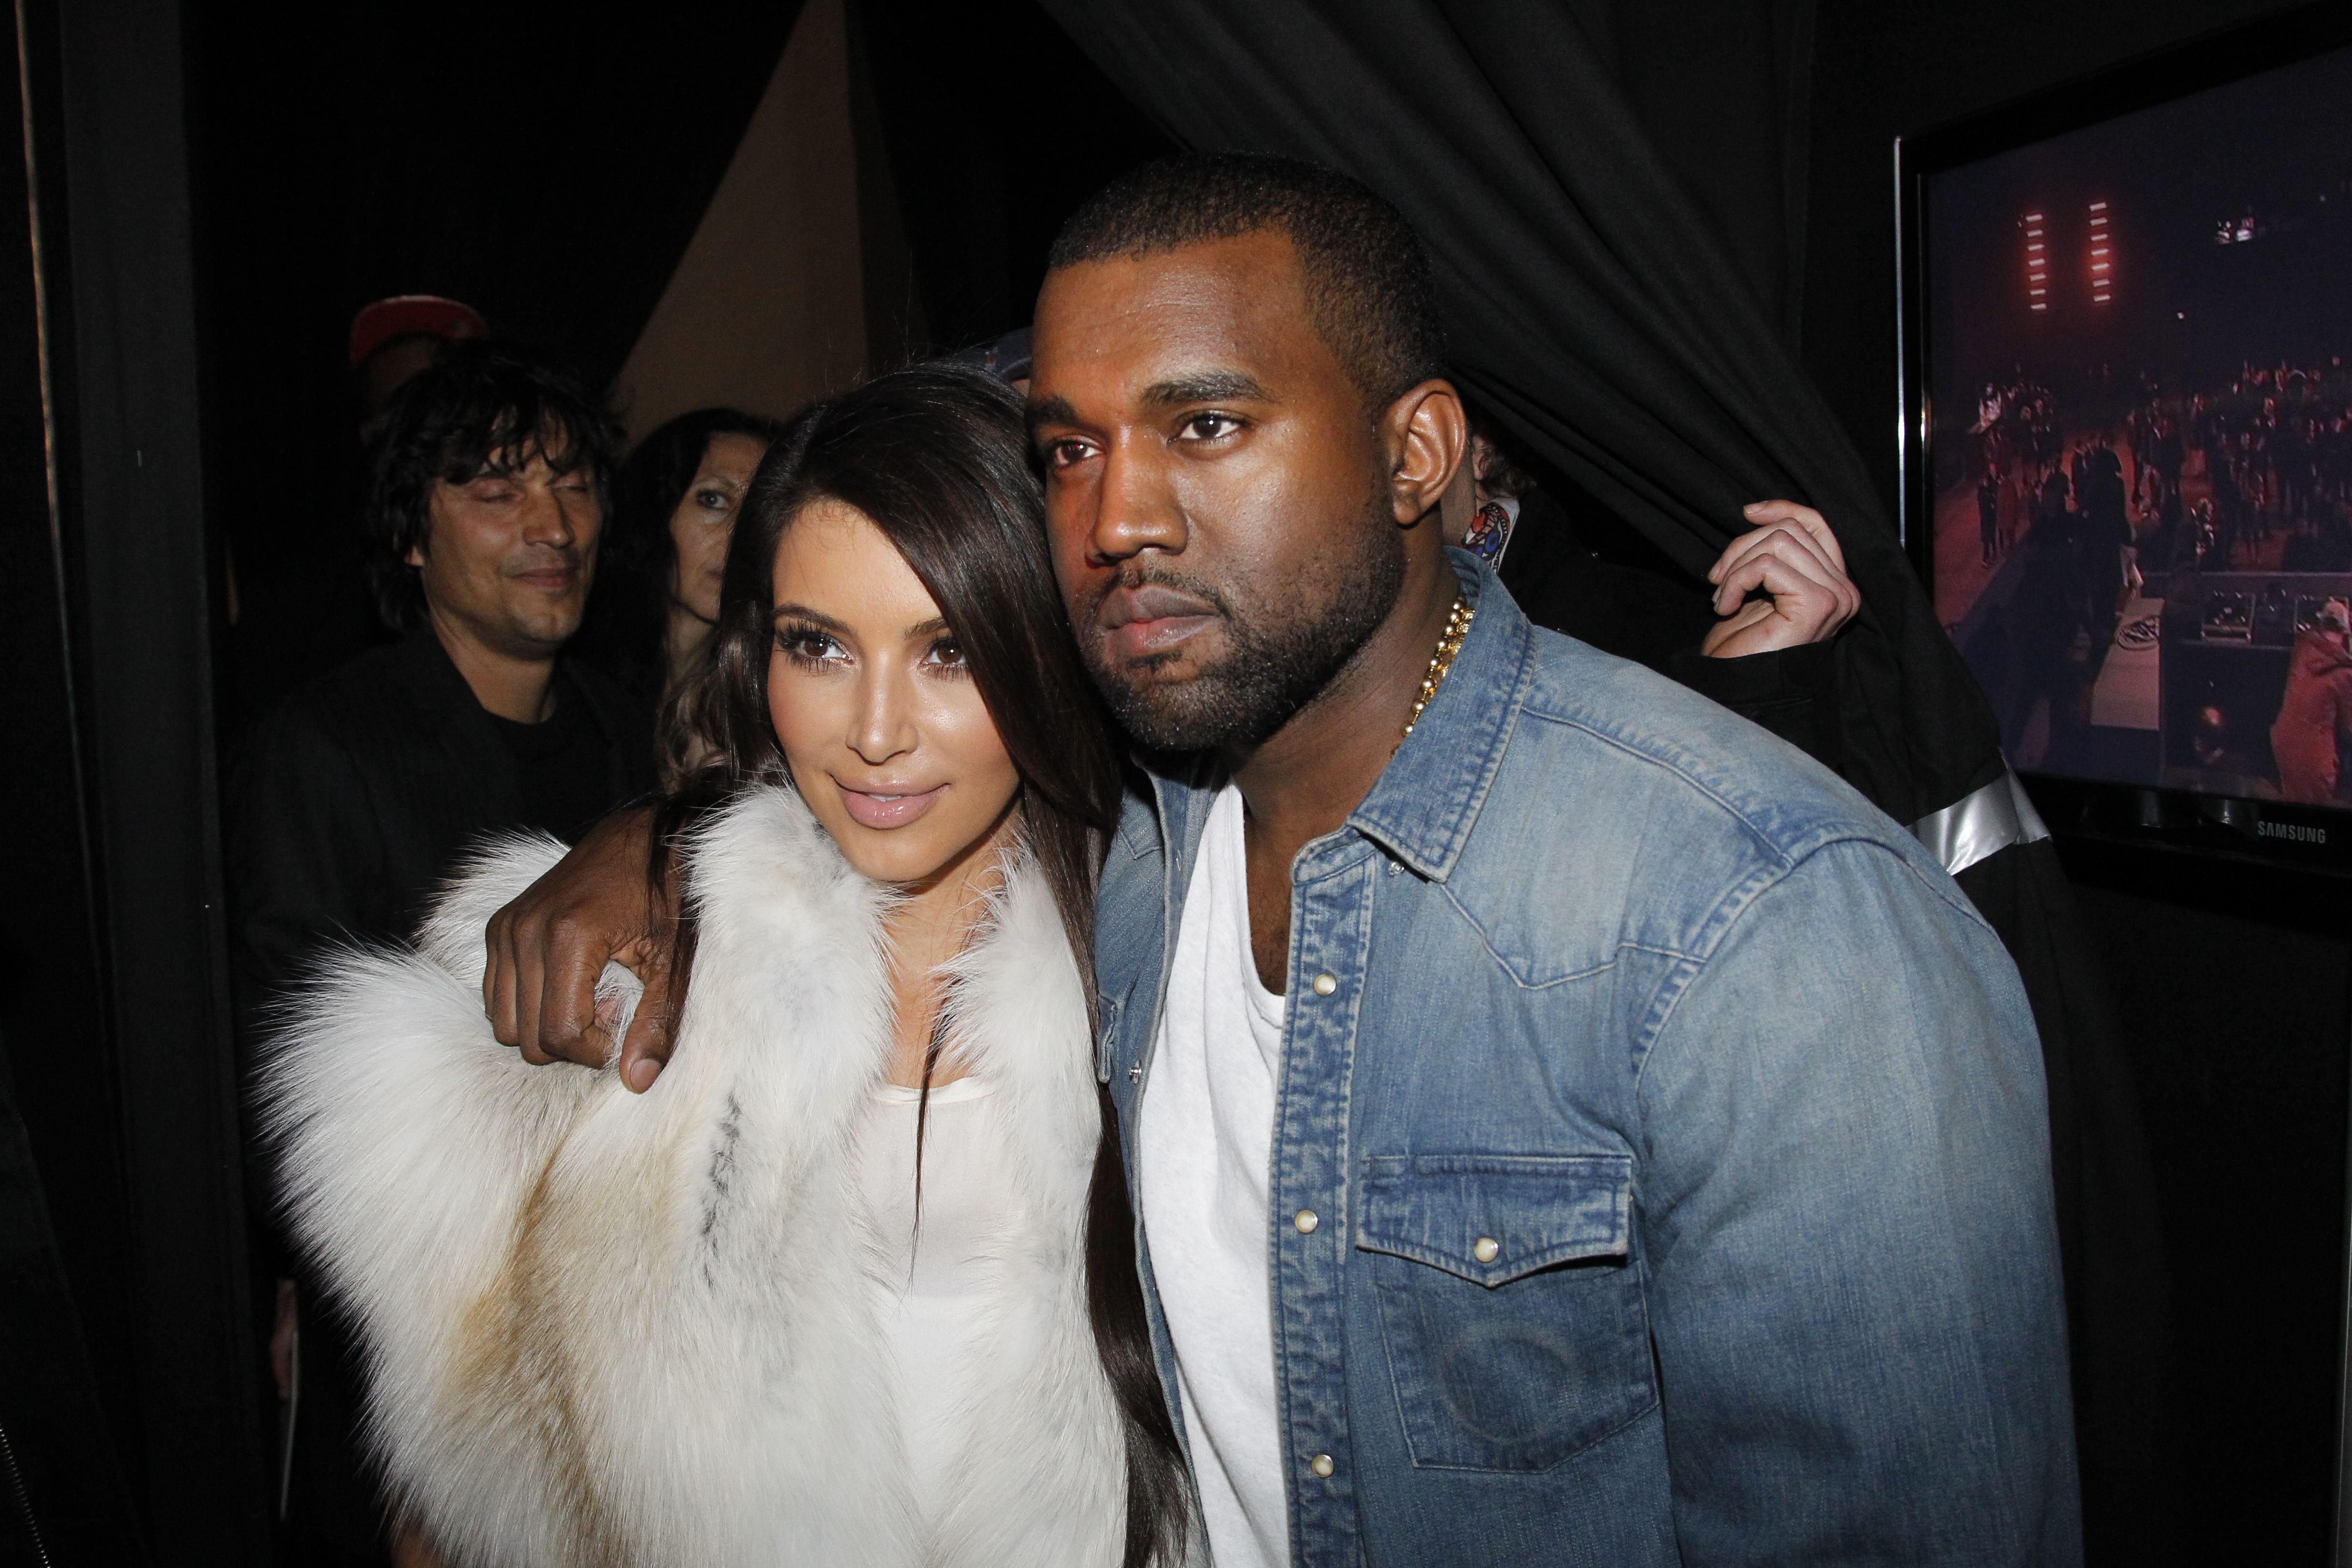 Kim Kardashian and Kanye West attend the Kanye West  Ready-To-Wear Fall/Winter 2012 show